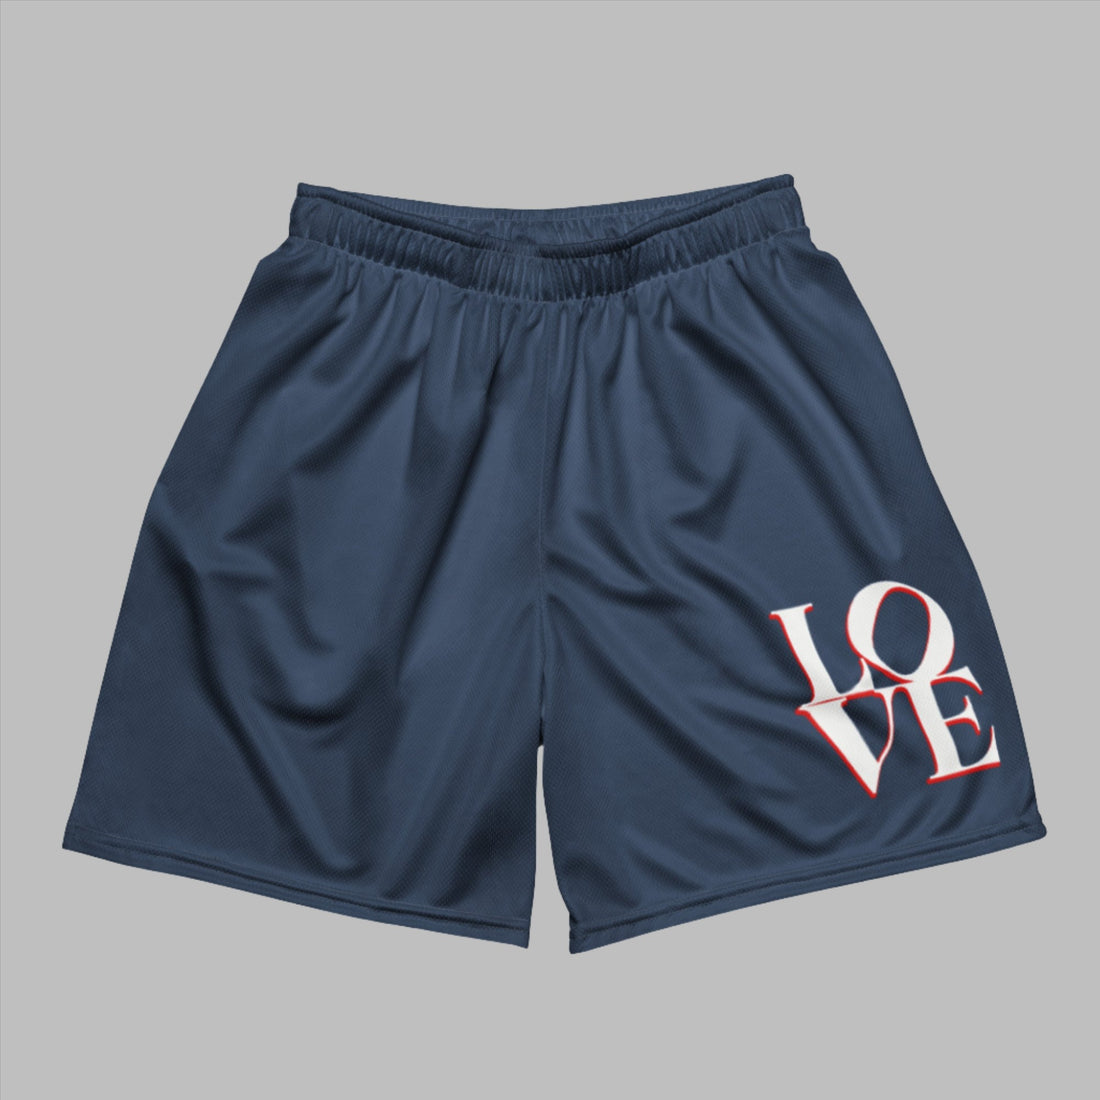 Philly Love Mesh Shorts